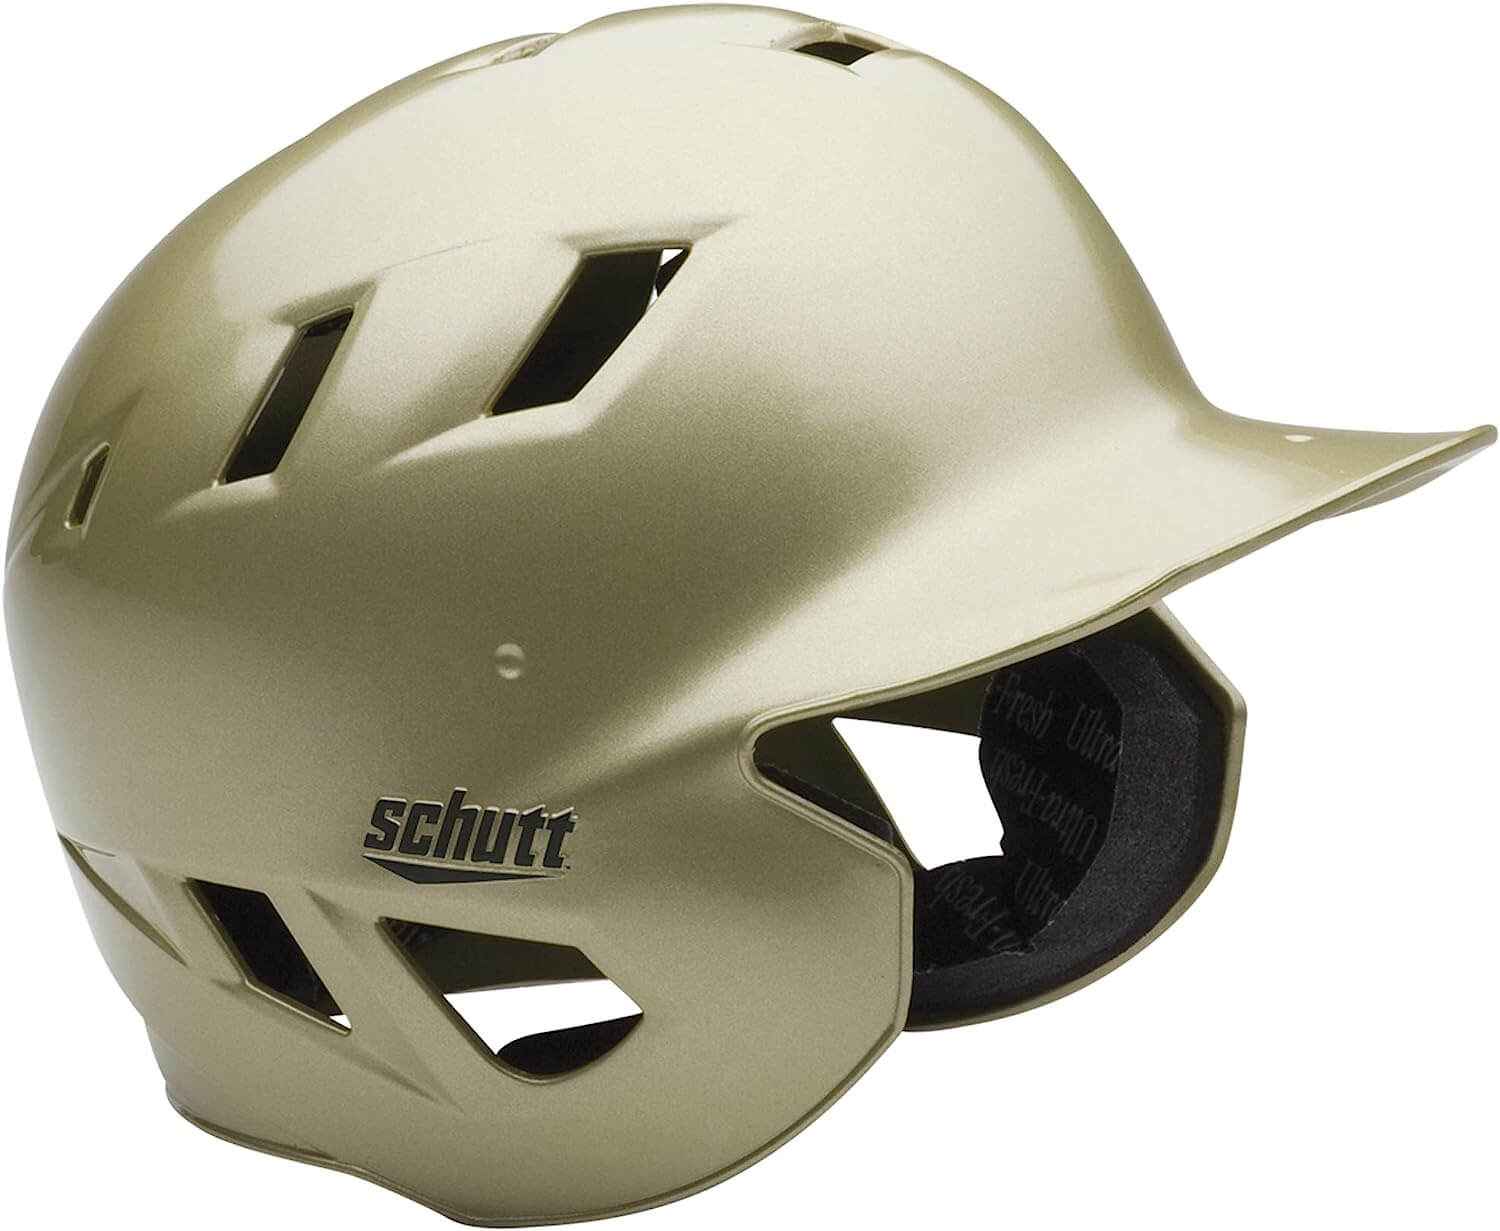 Baseball Helmet with Enhanced Safety Features